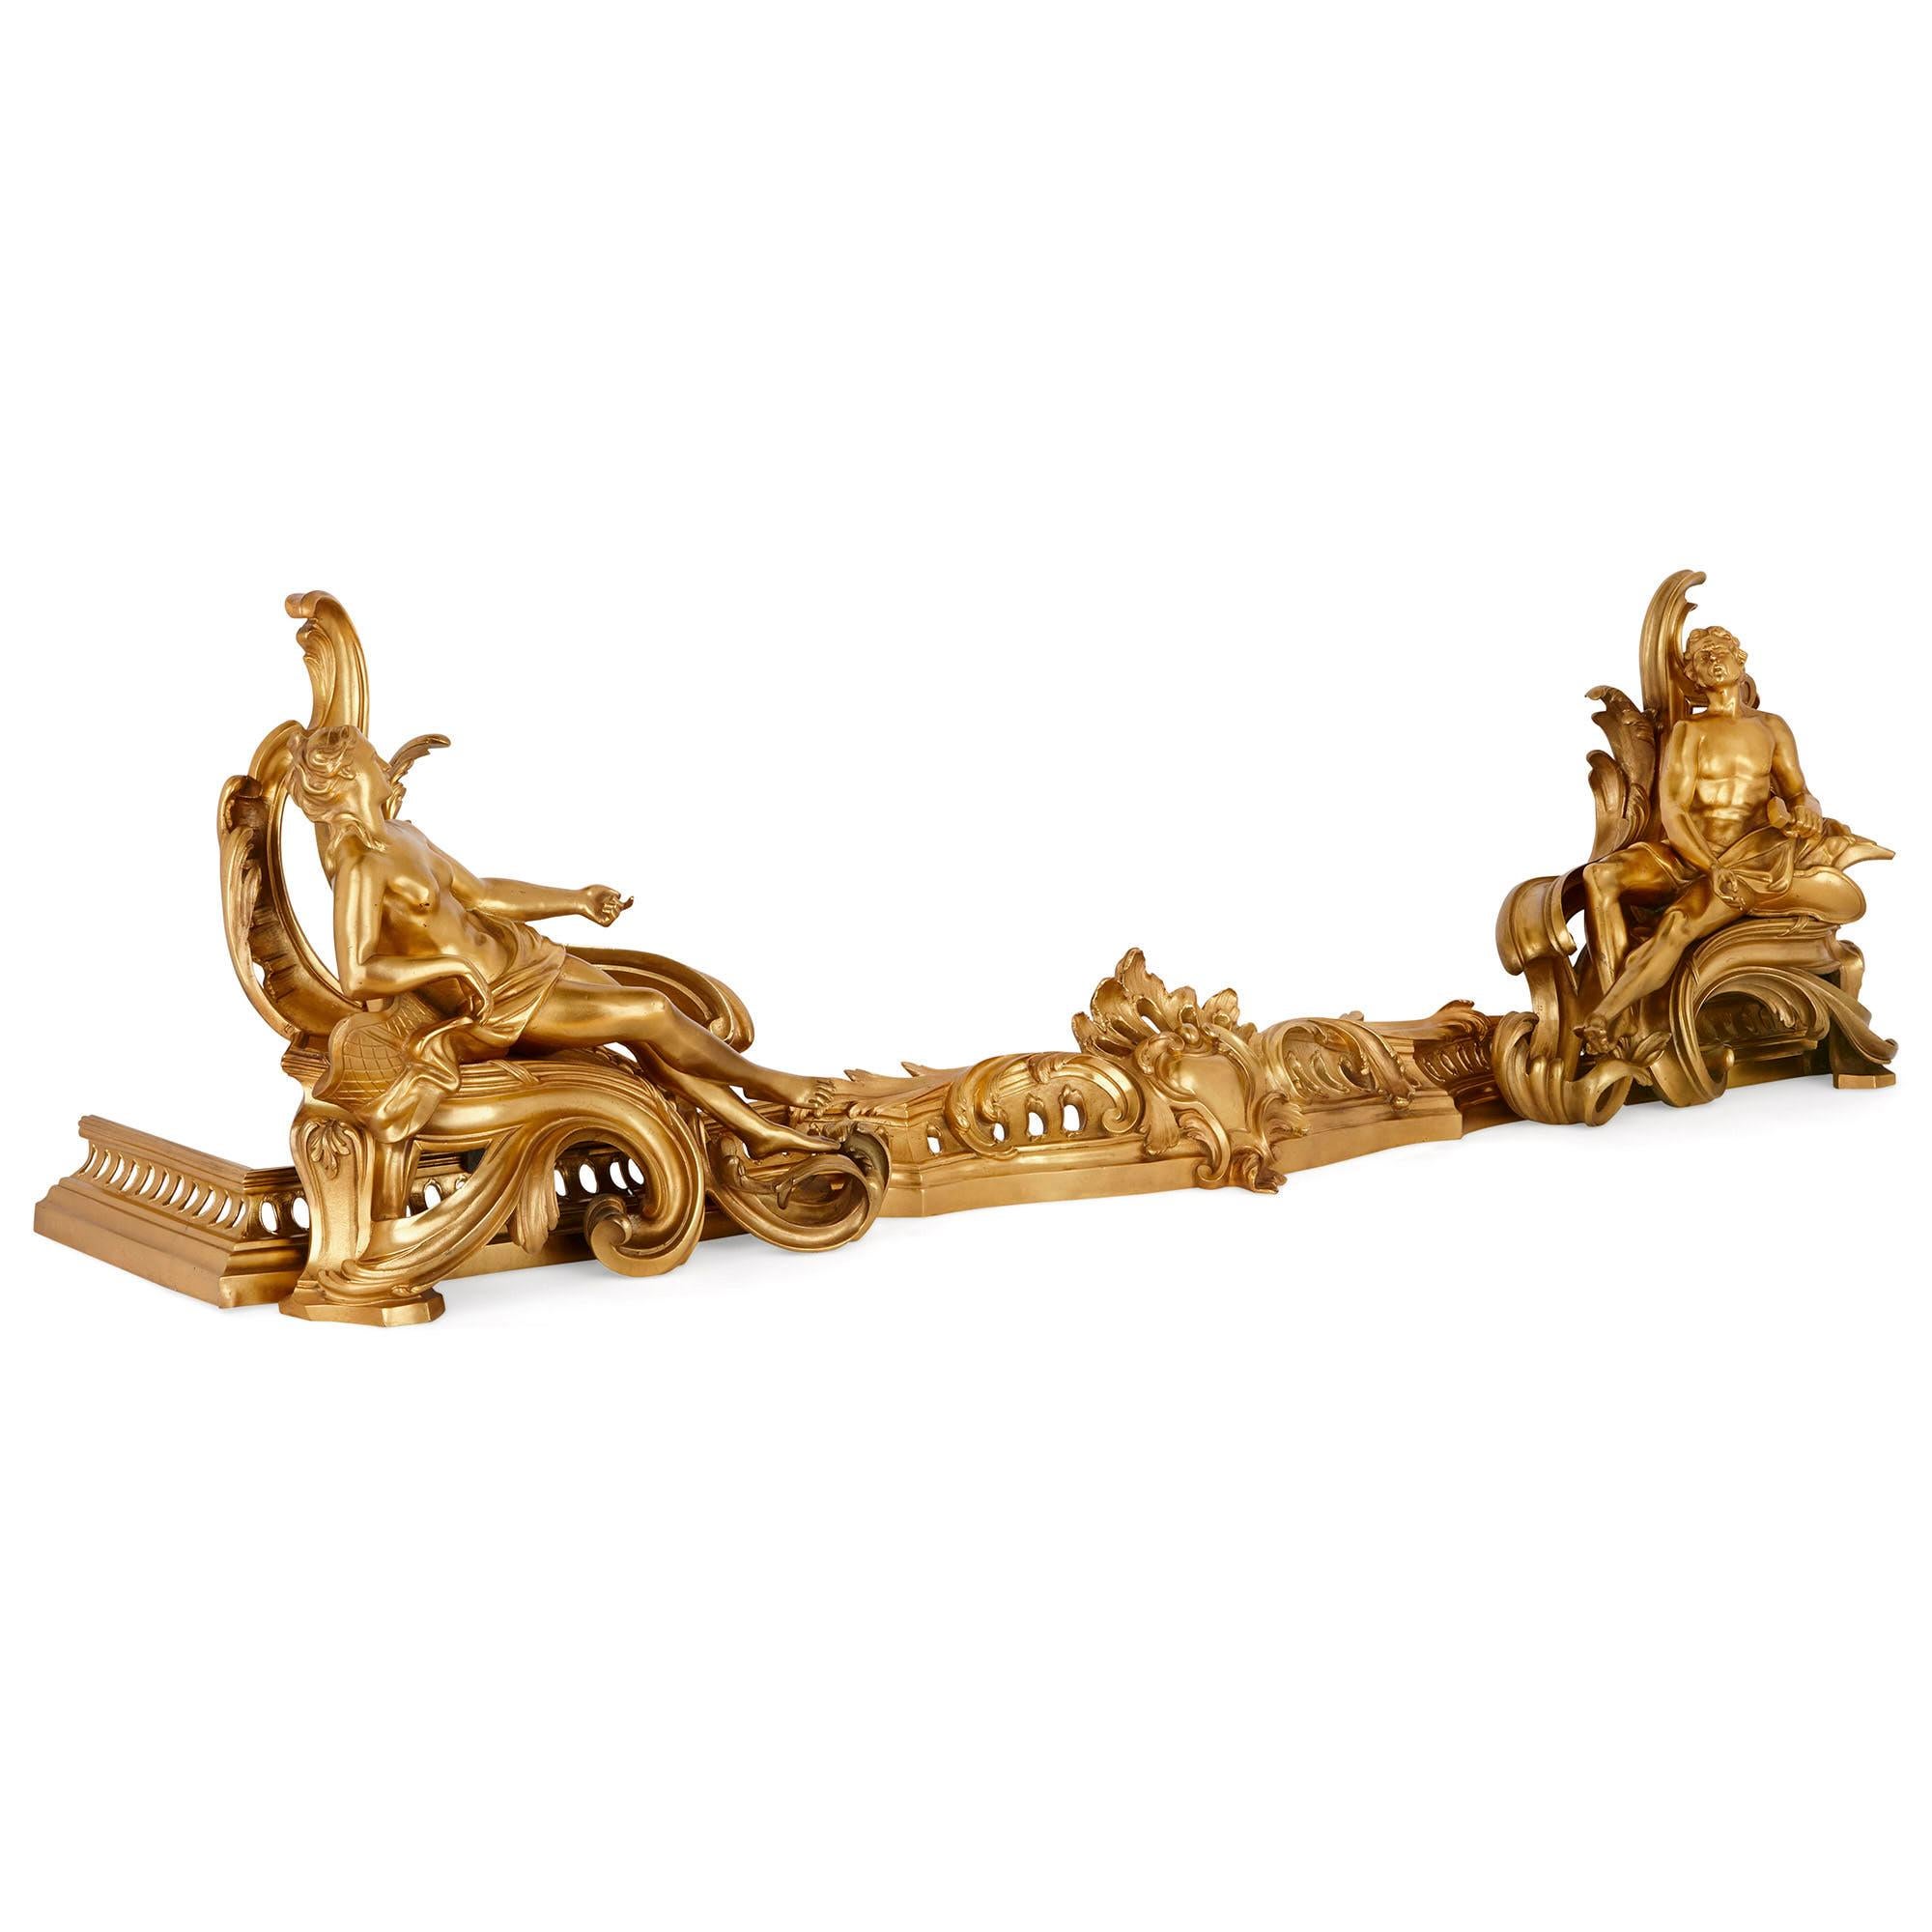 This elegant gilt bronze (ormolu) fireplace fender was created in France in the late 19th century. The item will add splendour and beauty to a fireplace, making it the focal point of a room.

The fender features a pierced rail which is decorated